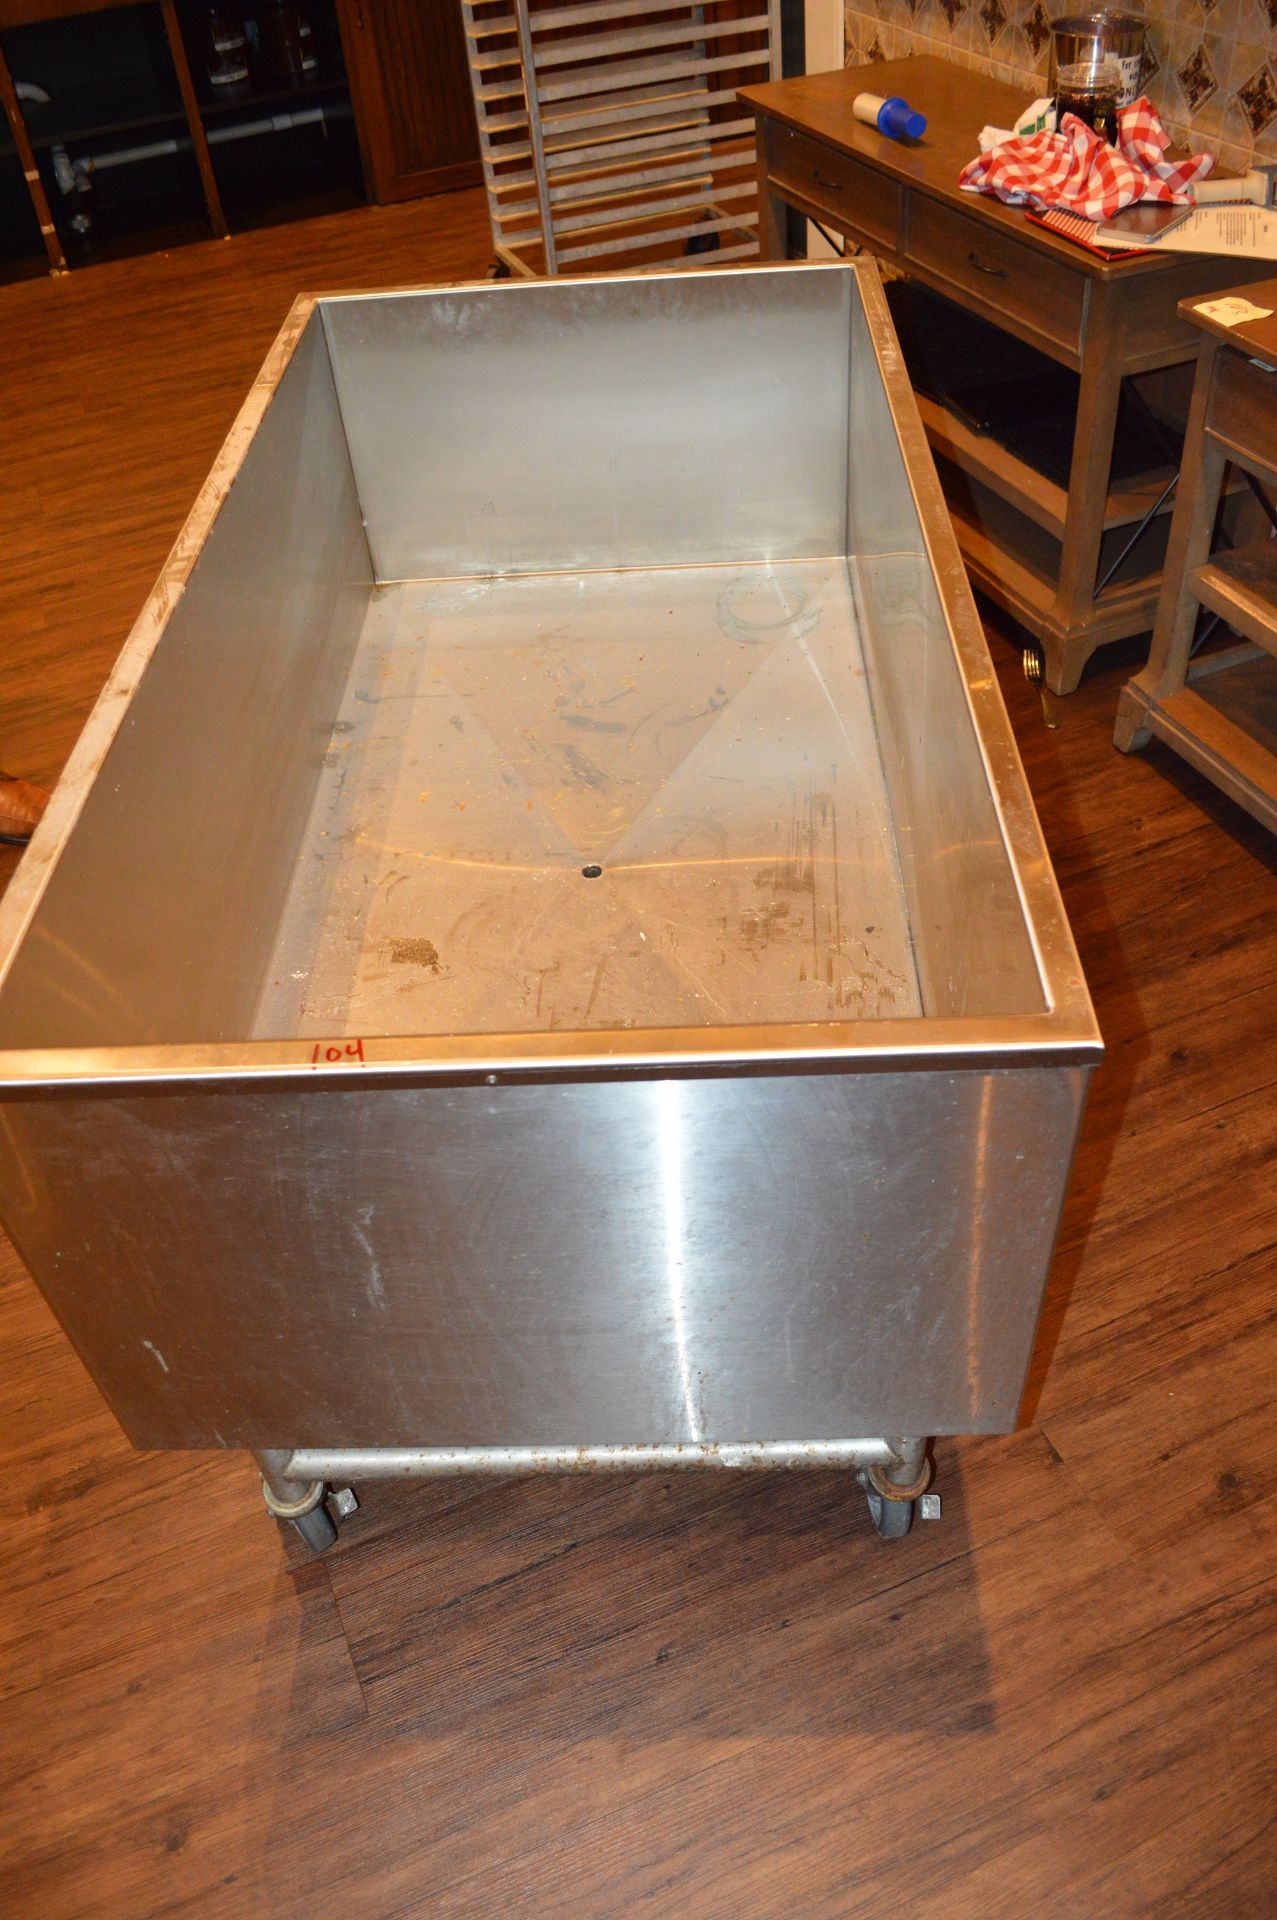 30 X 60 INCH LARGE INSULATED STAINLESS STEEL TUB ON CASTORS WITH DRAIN VALVE